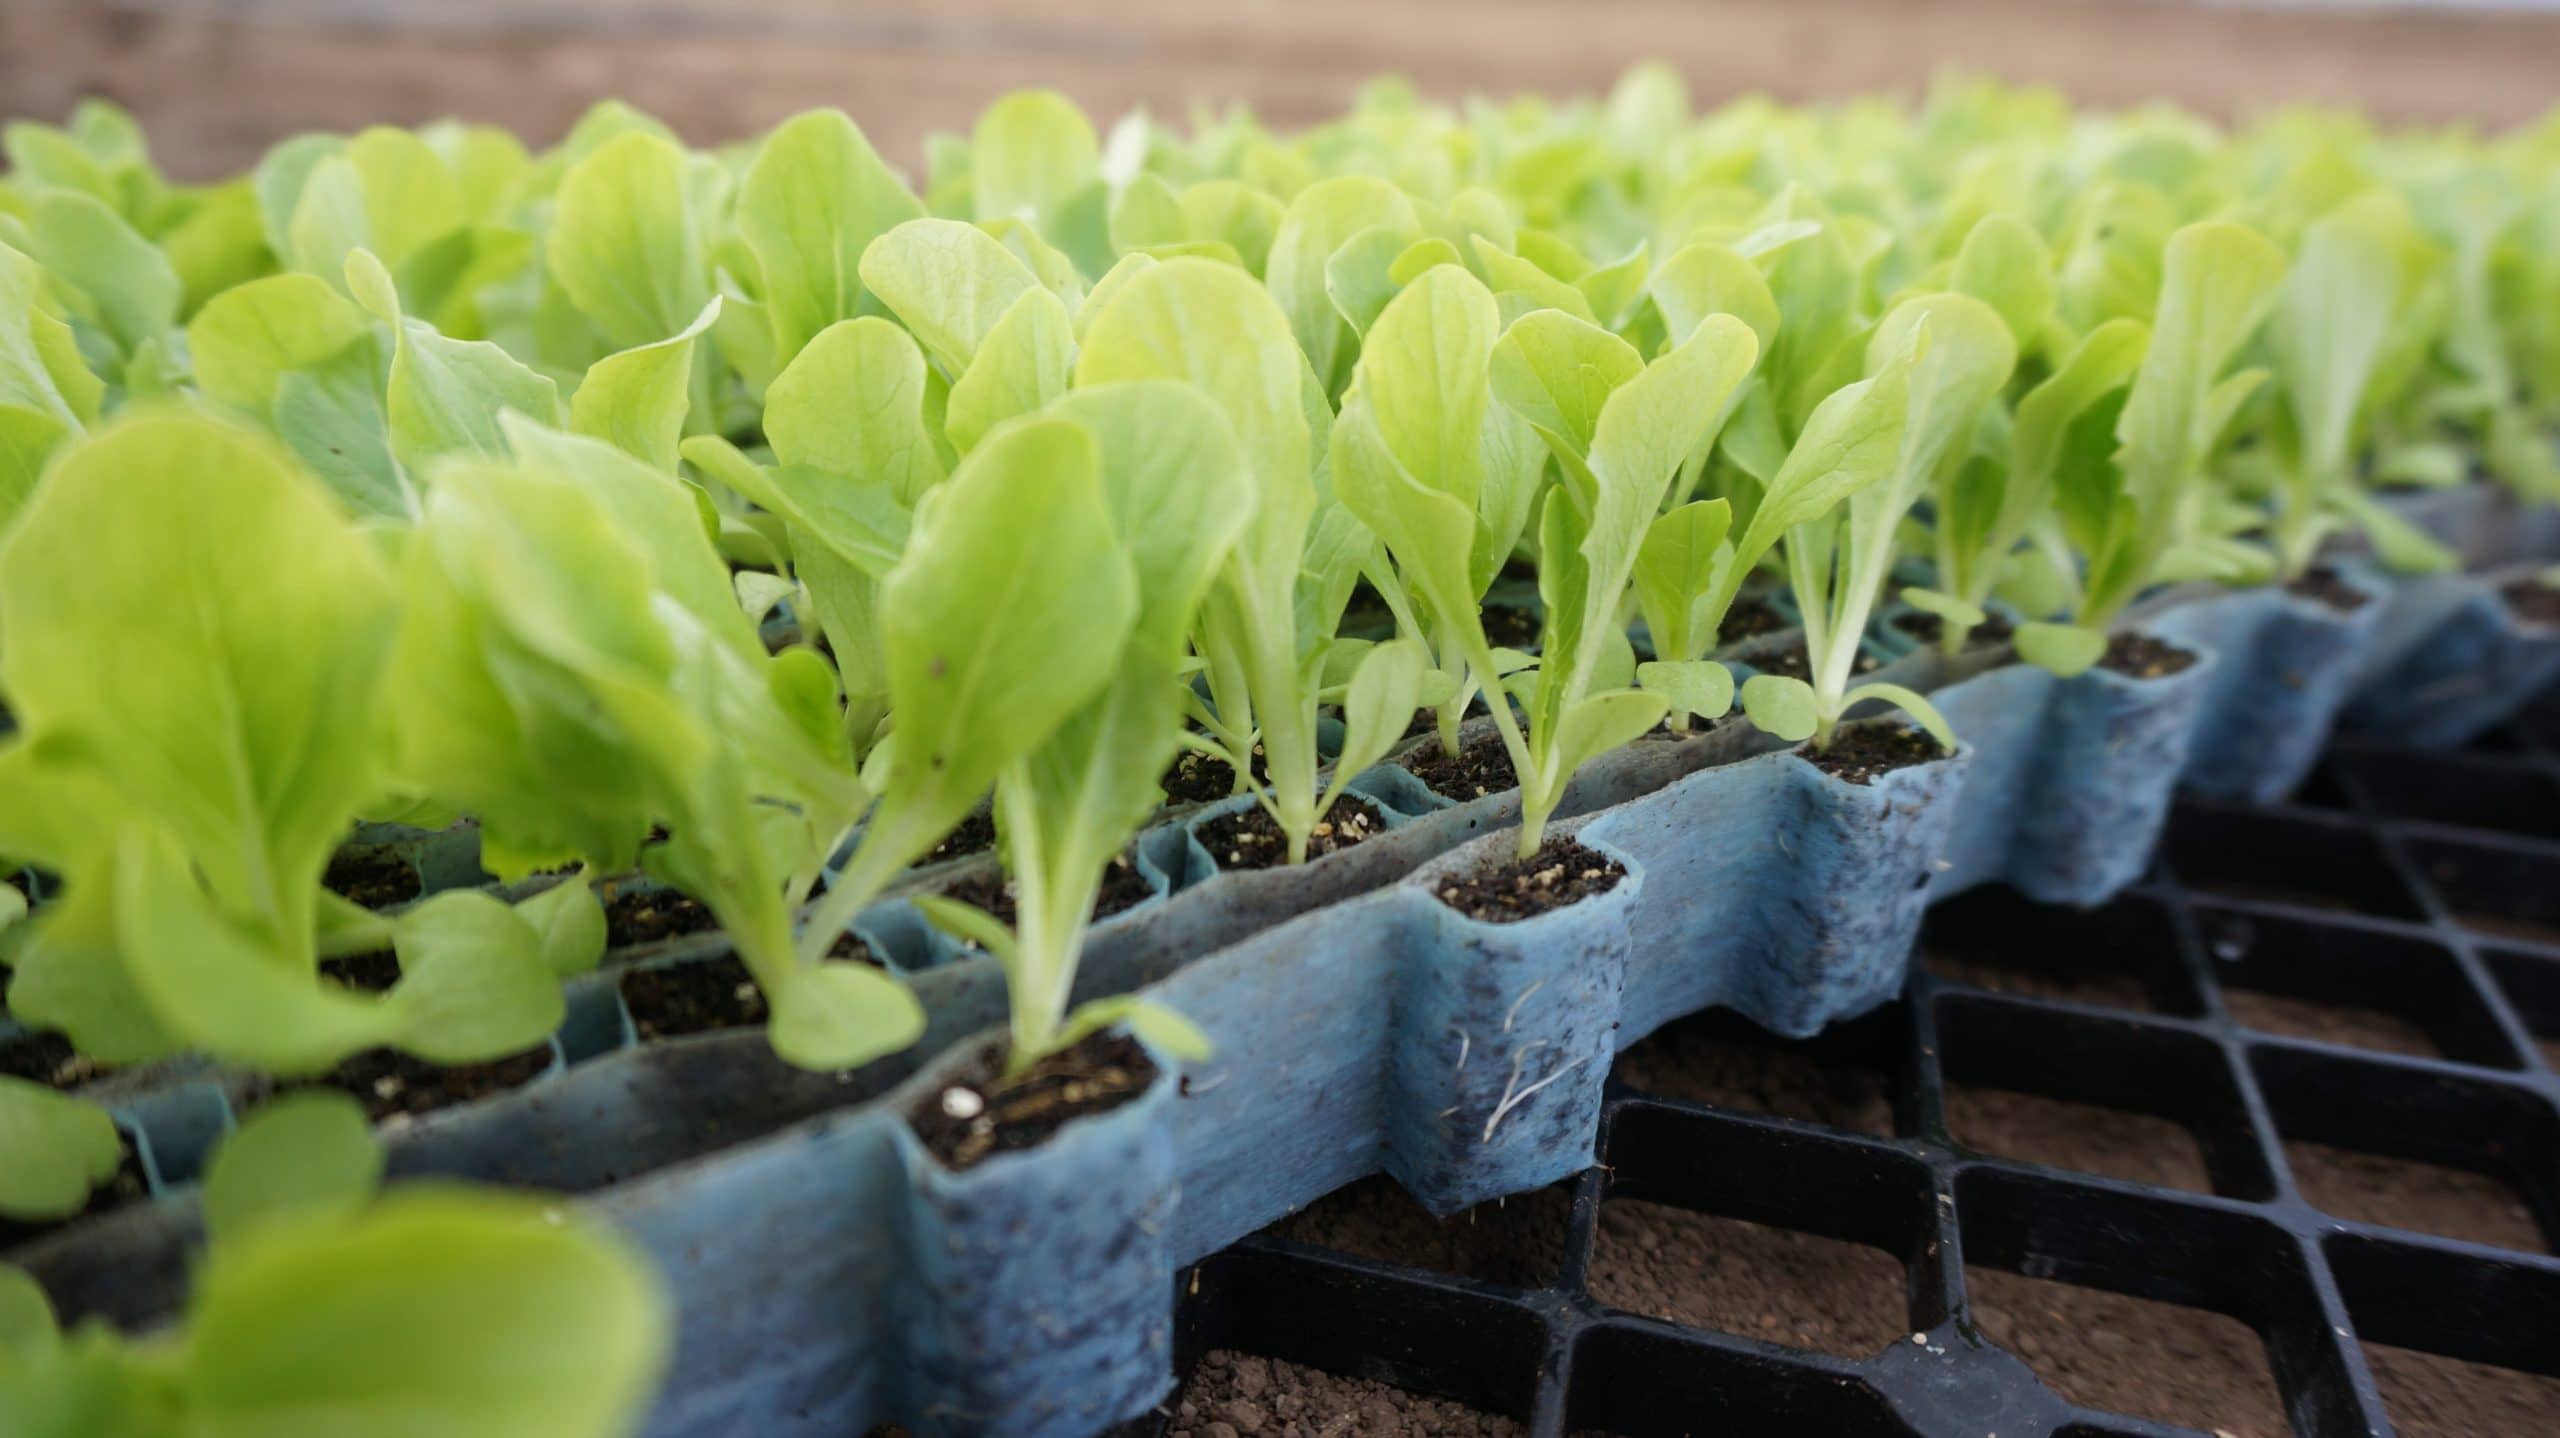 PlantTape Transplants using Stokes Seeds for a lettuce variety